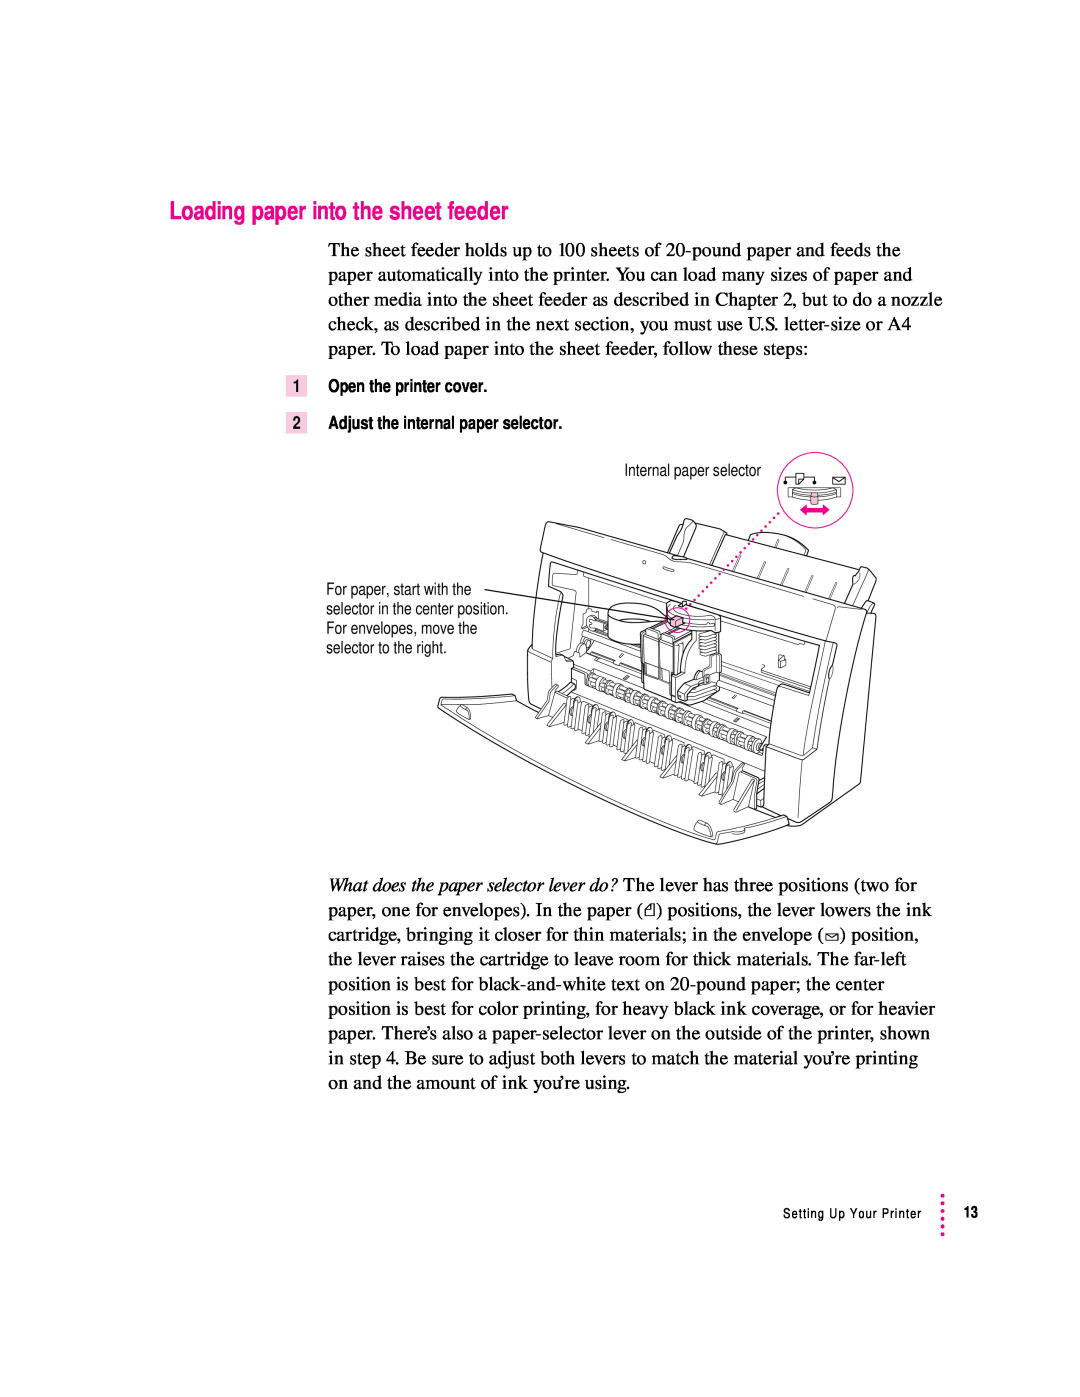 Apple 2400 manual Loading paper into the sheet feeder, Open the printer cover 2 Adjust the internal paper selector 